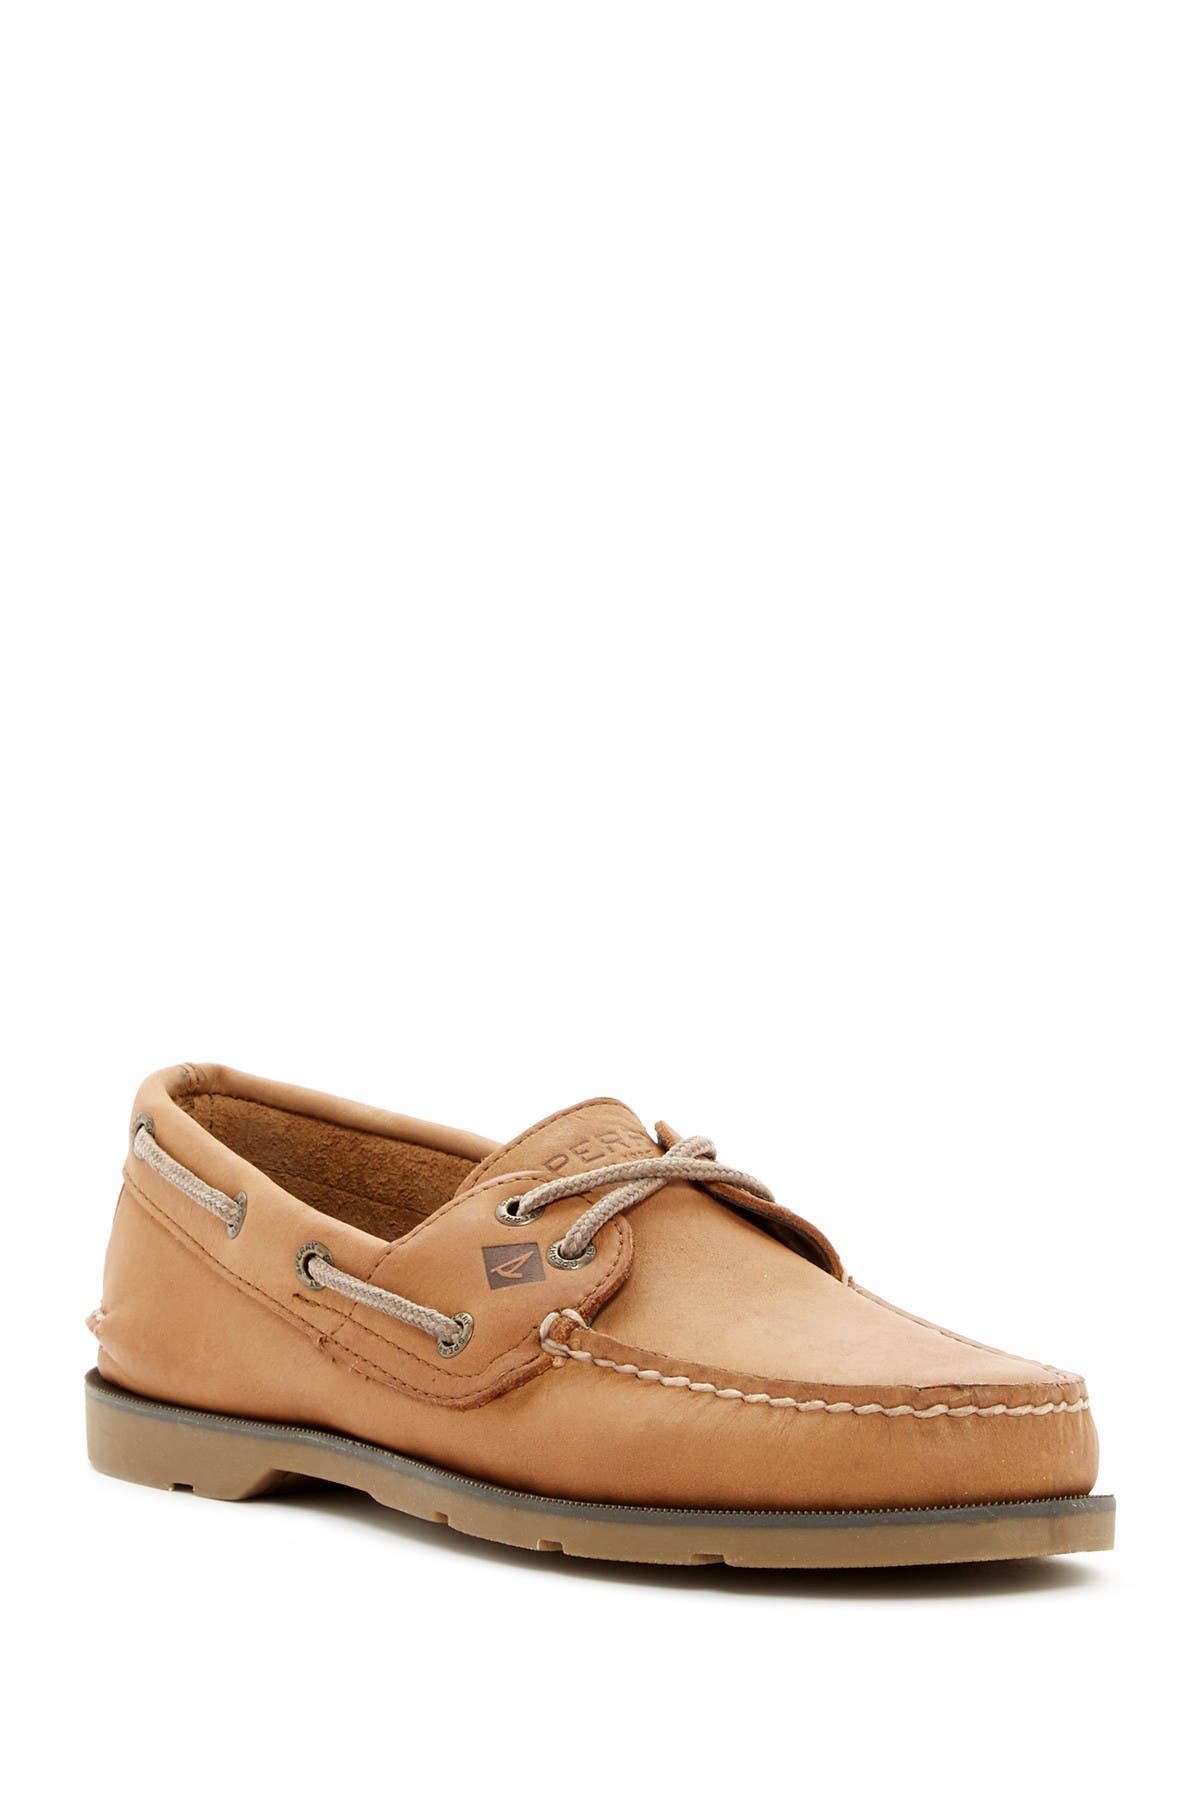 sperry boat shoes wide width